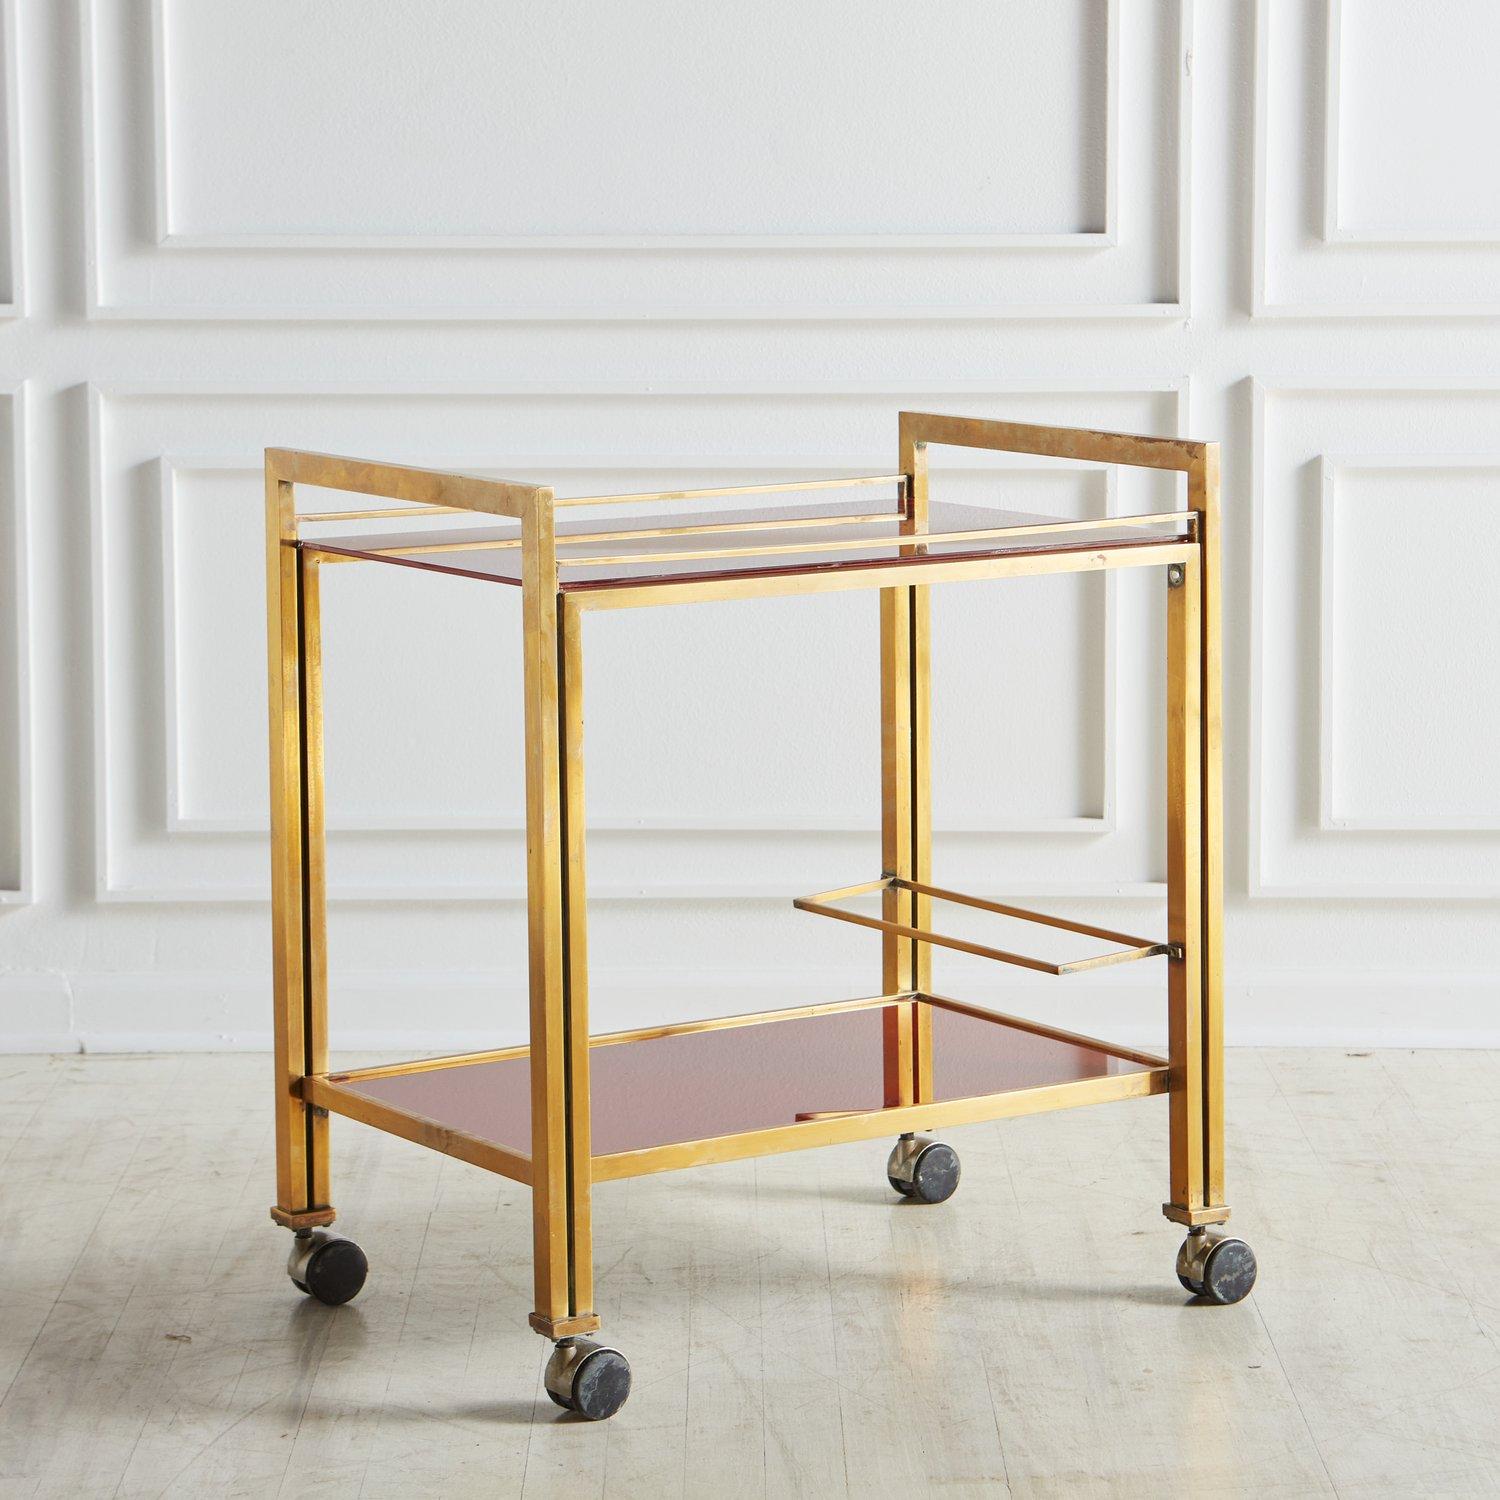 n elegant two-tier patinated brass with red glass shelves bar cart by Guy Lefevre for Maison Jansen. The combination of materials and the straight lines give this bar cart a modern look. And the unique red glass makes this bar cart the life of any